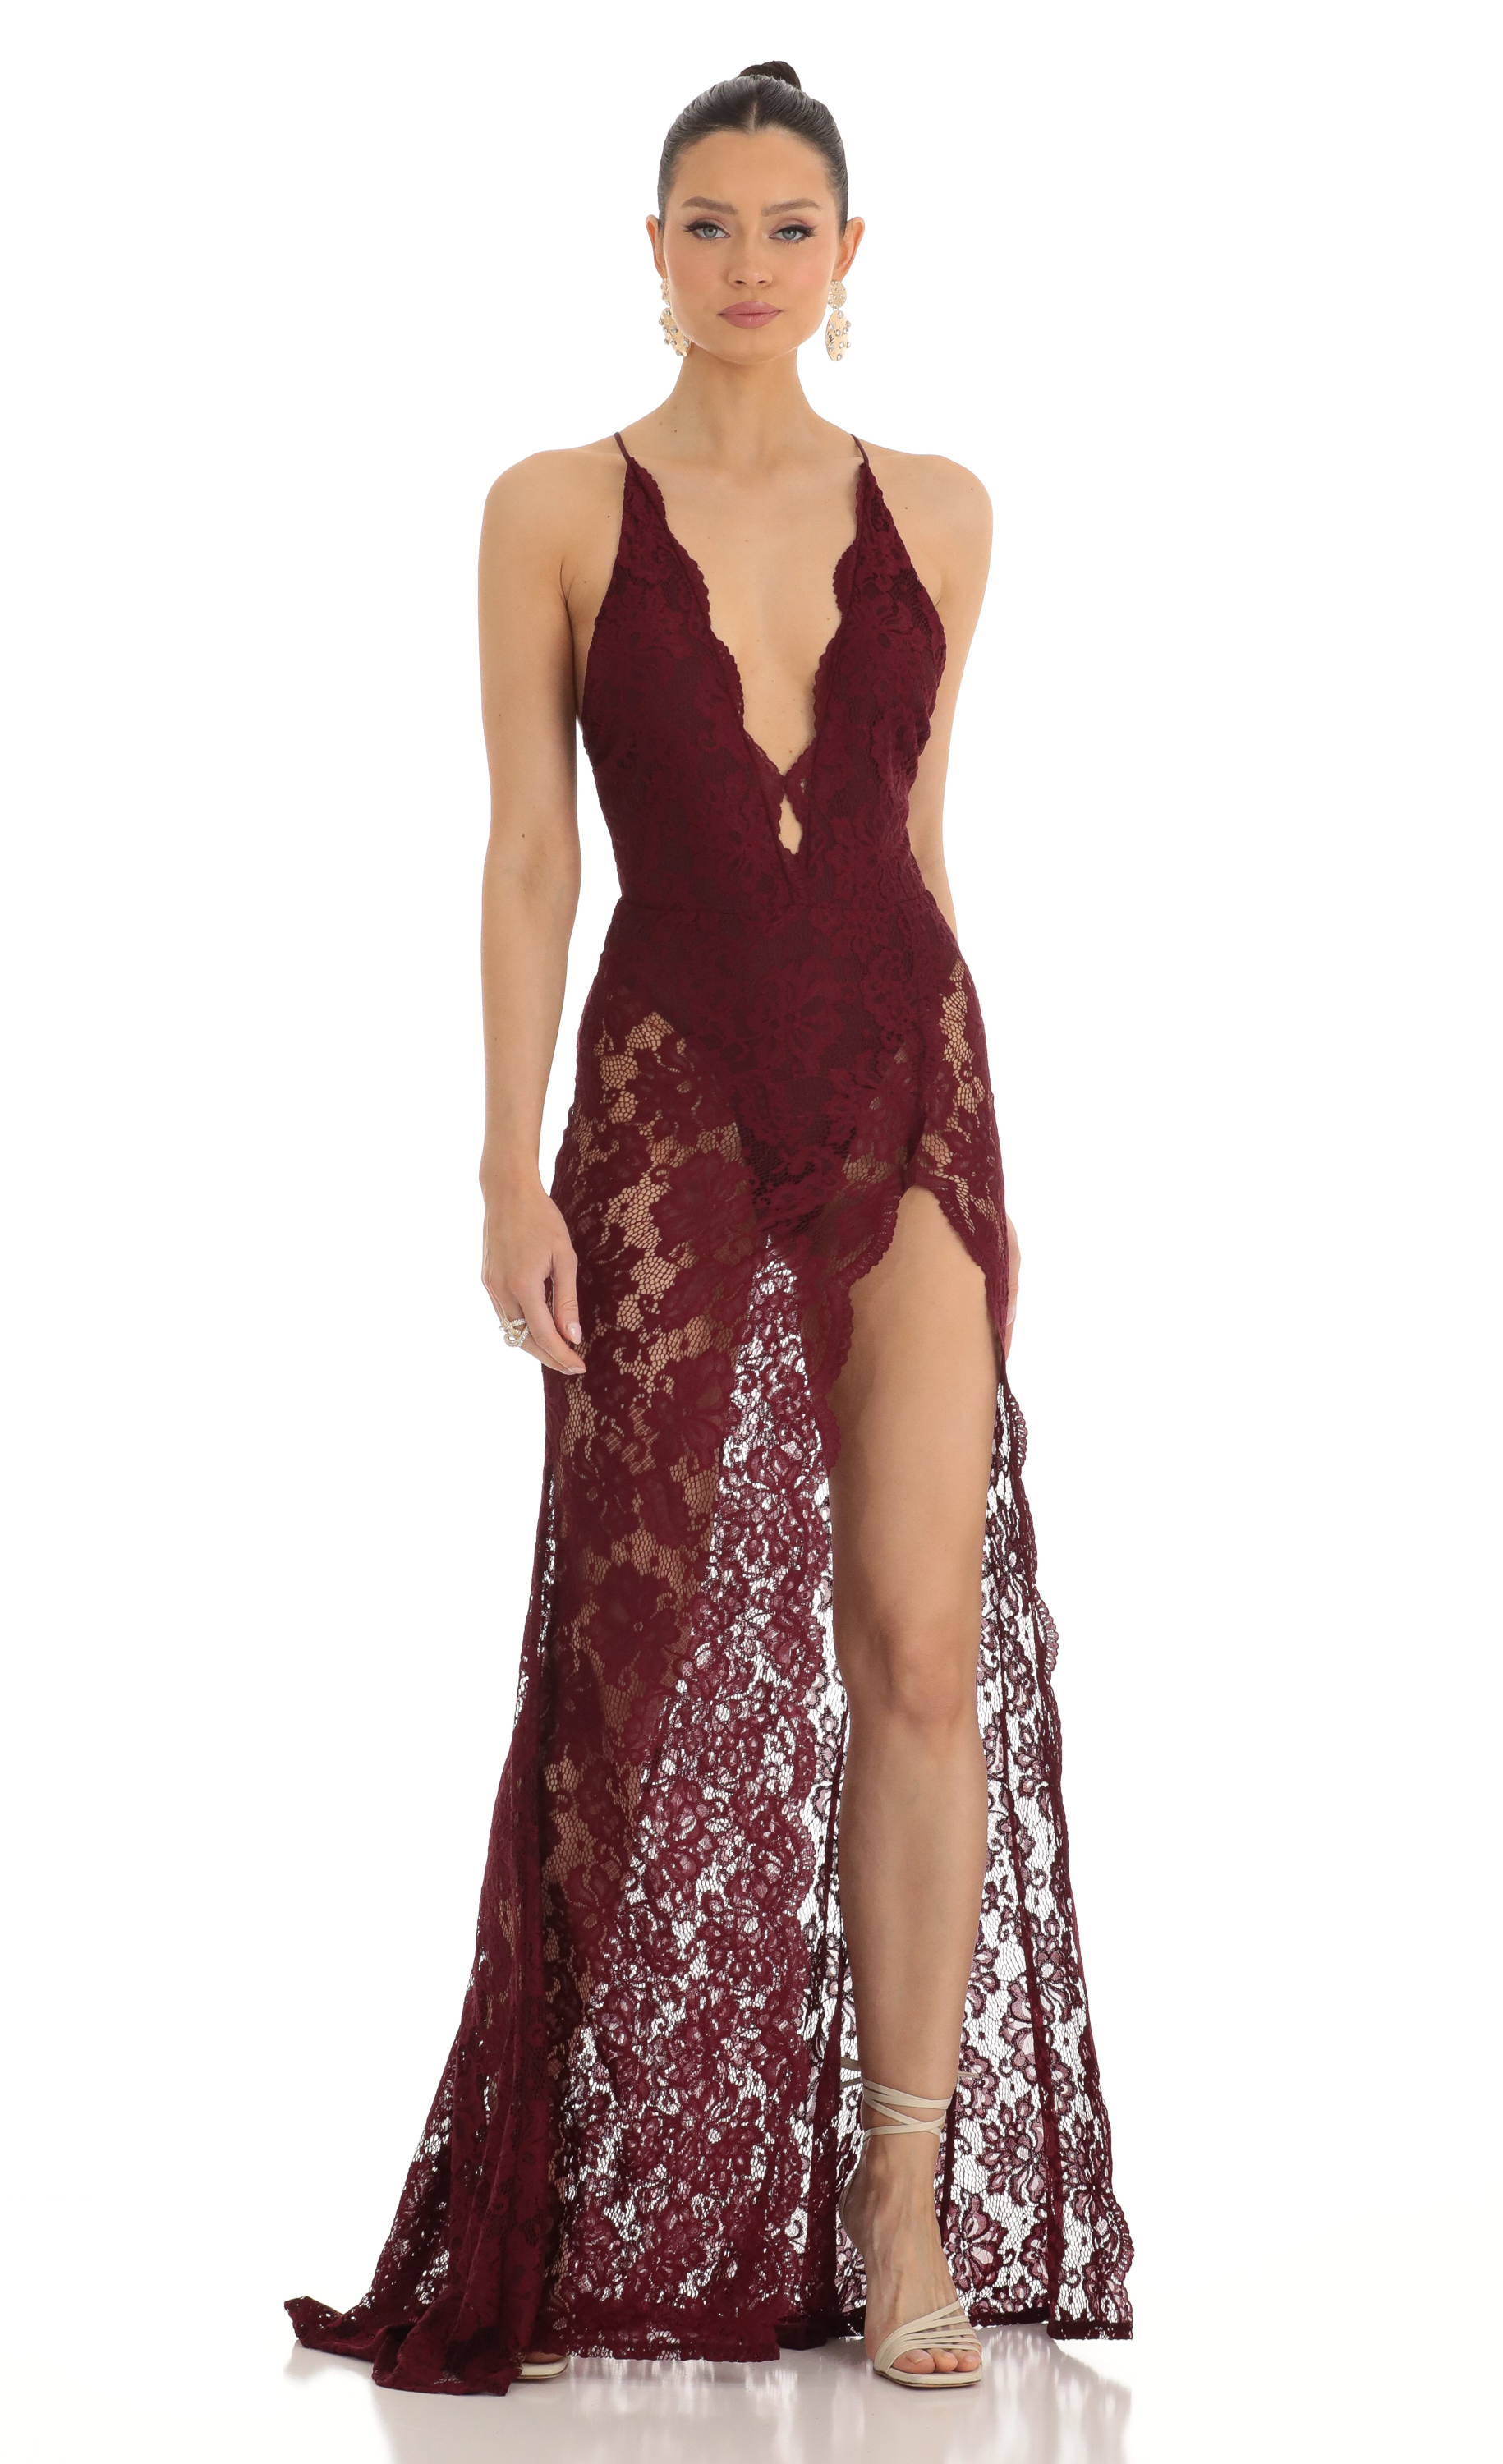 Charity Lace Maxi Dress in Red